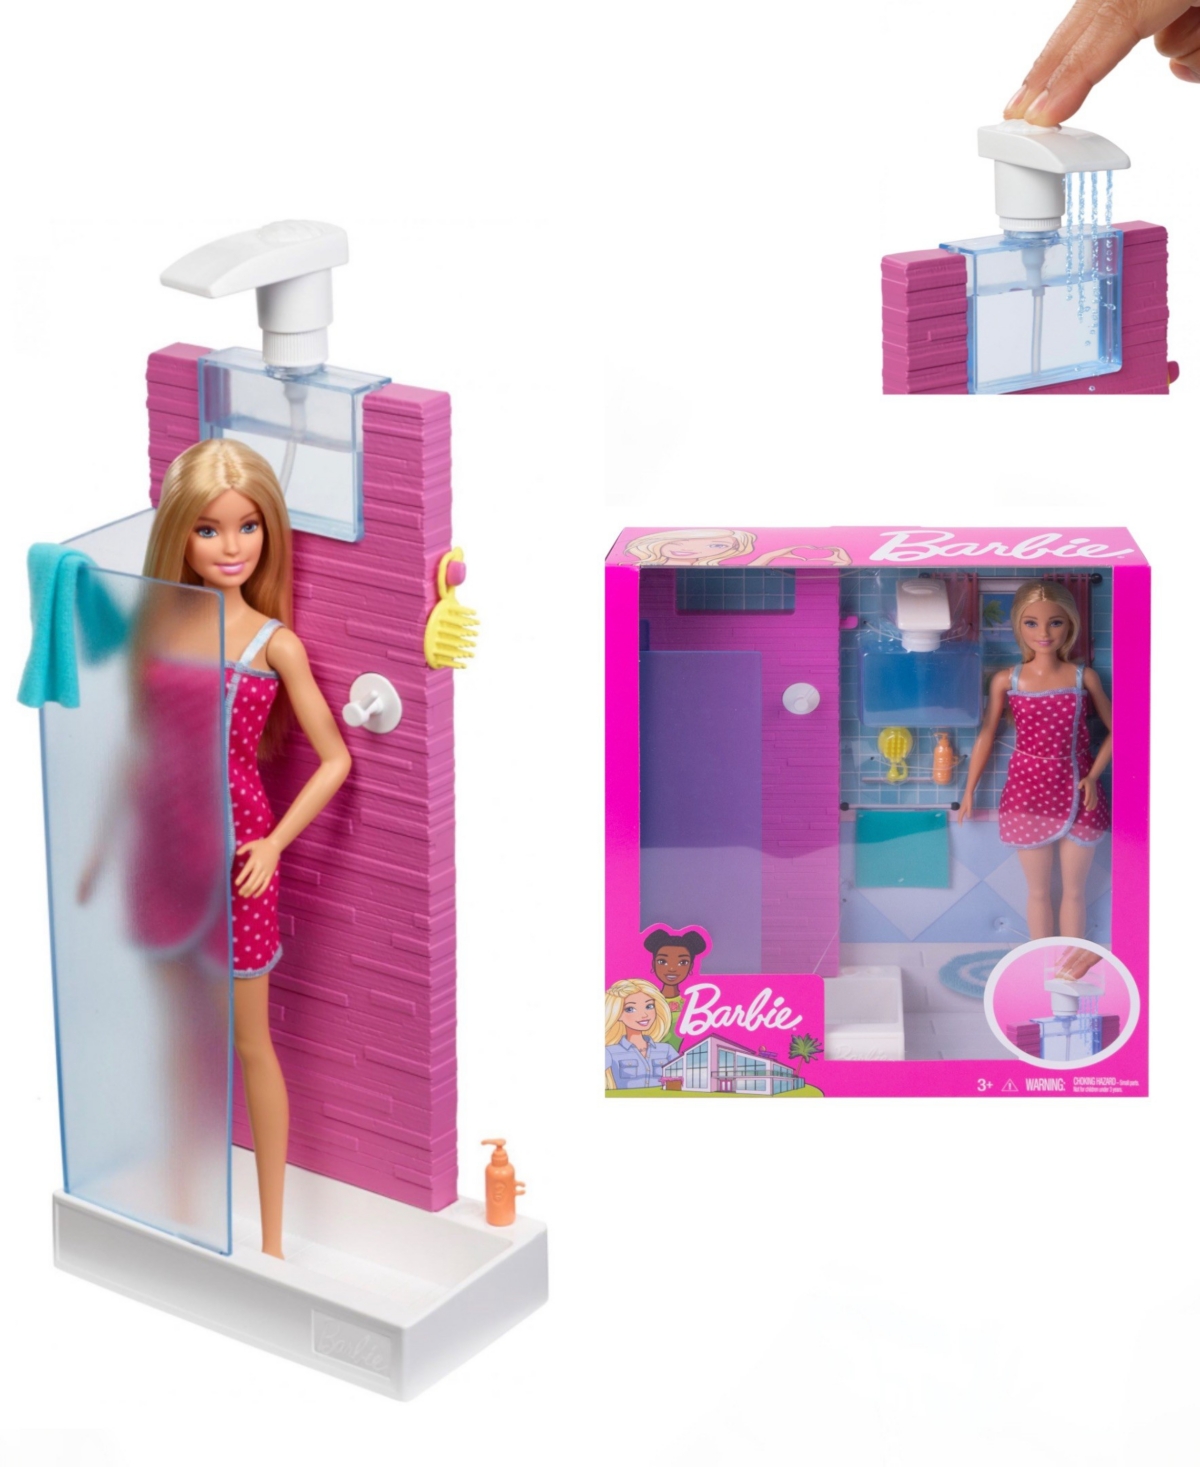 Barbie Spa Bathroom And Working Shower Play Set, 5 Pieces In Multi Colored Plastic